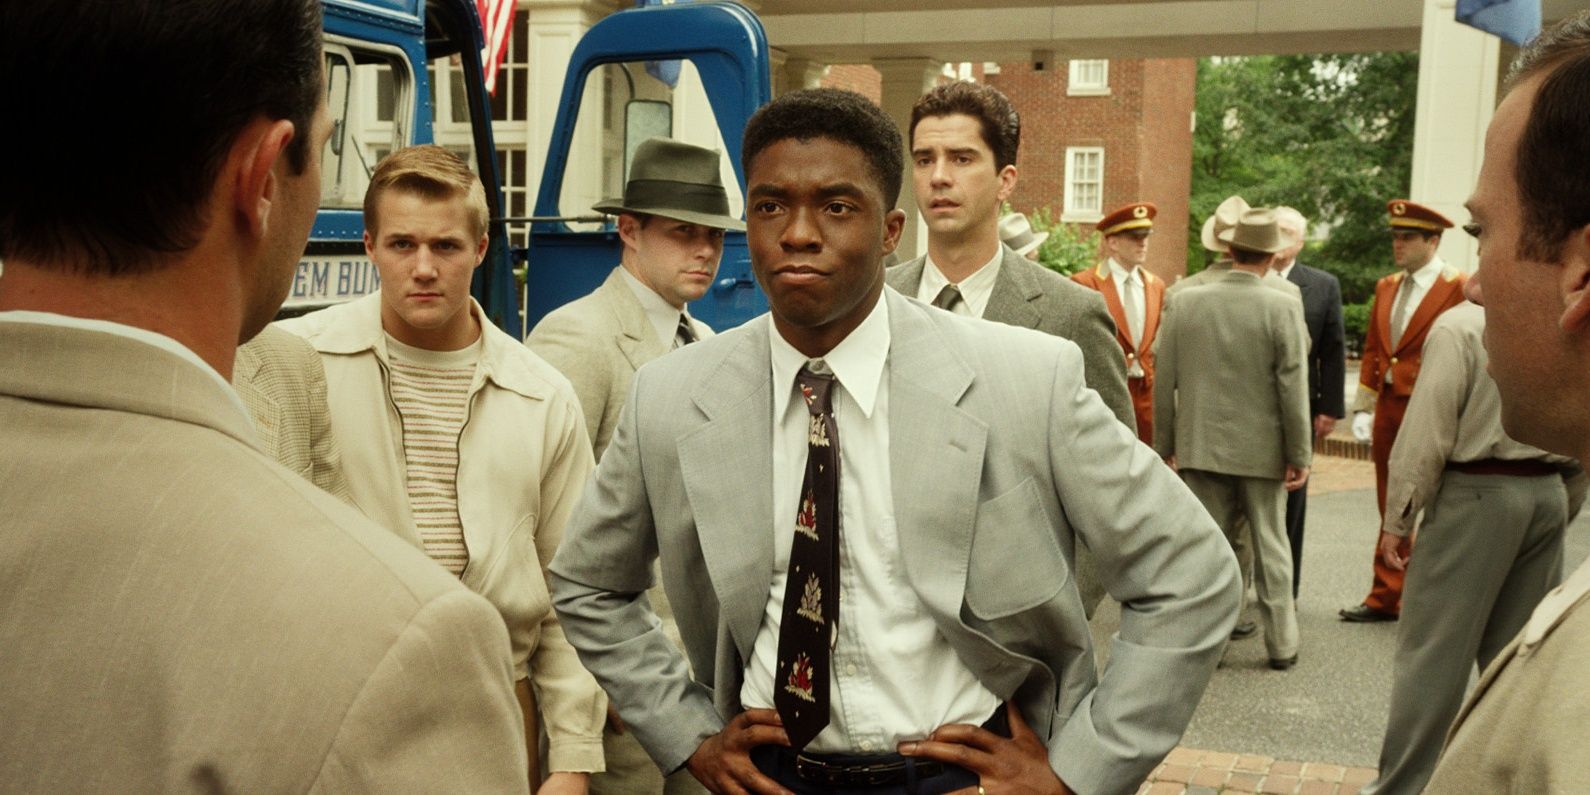 Chadwick Boseman, as Jackie Robinson, stands in front of teammates in the film 42